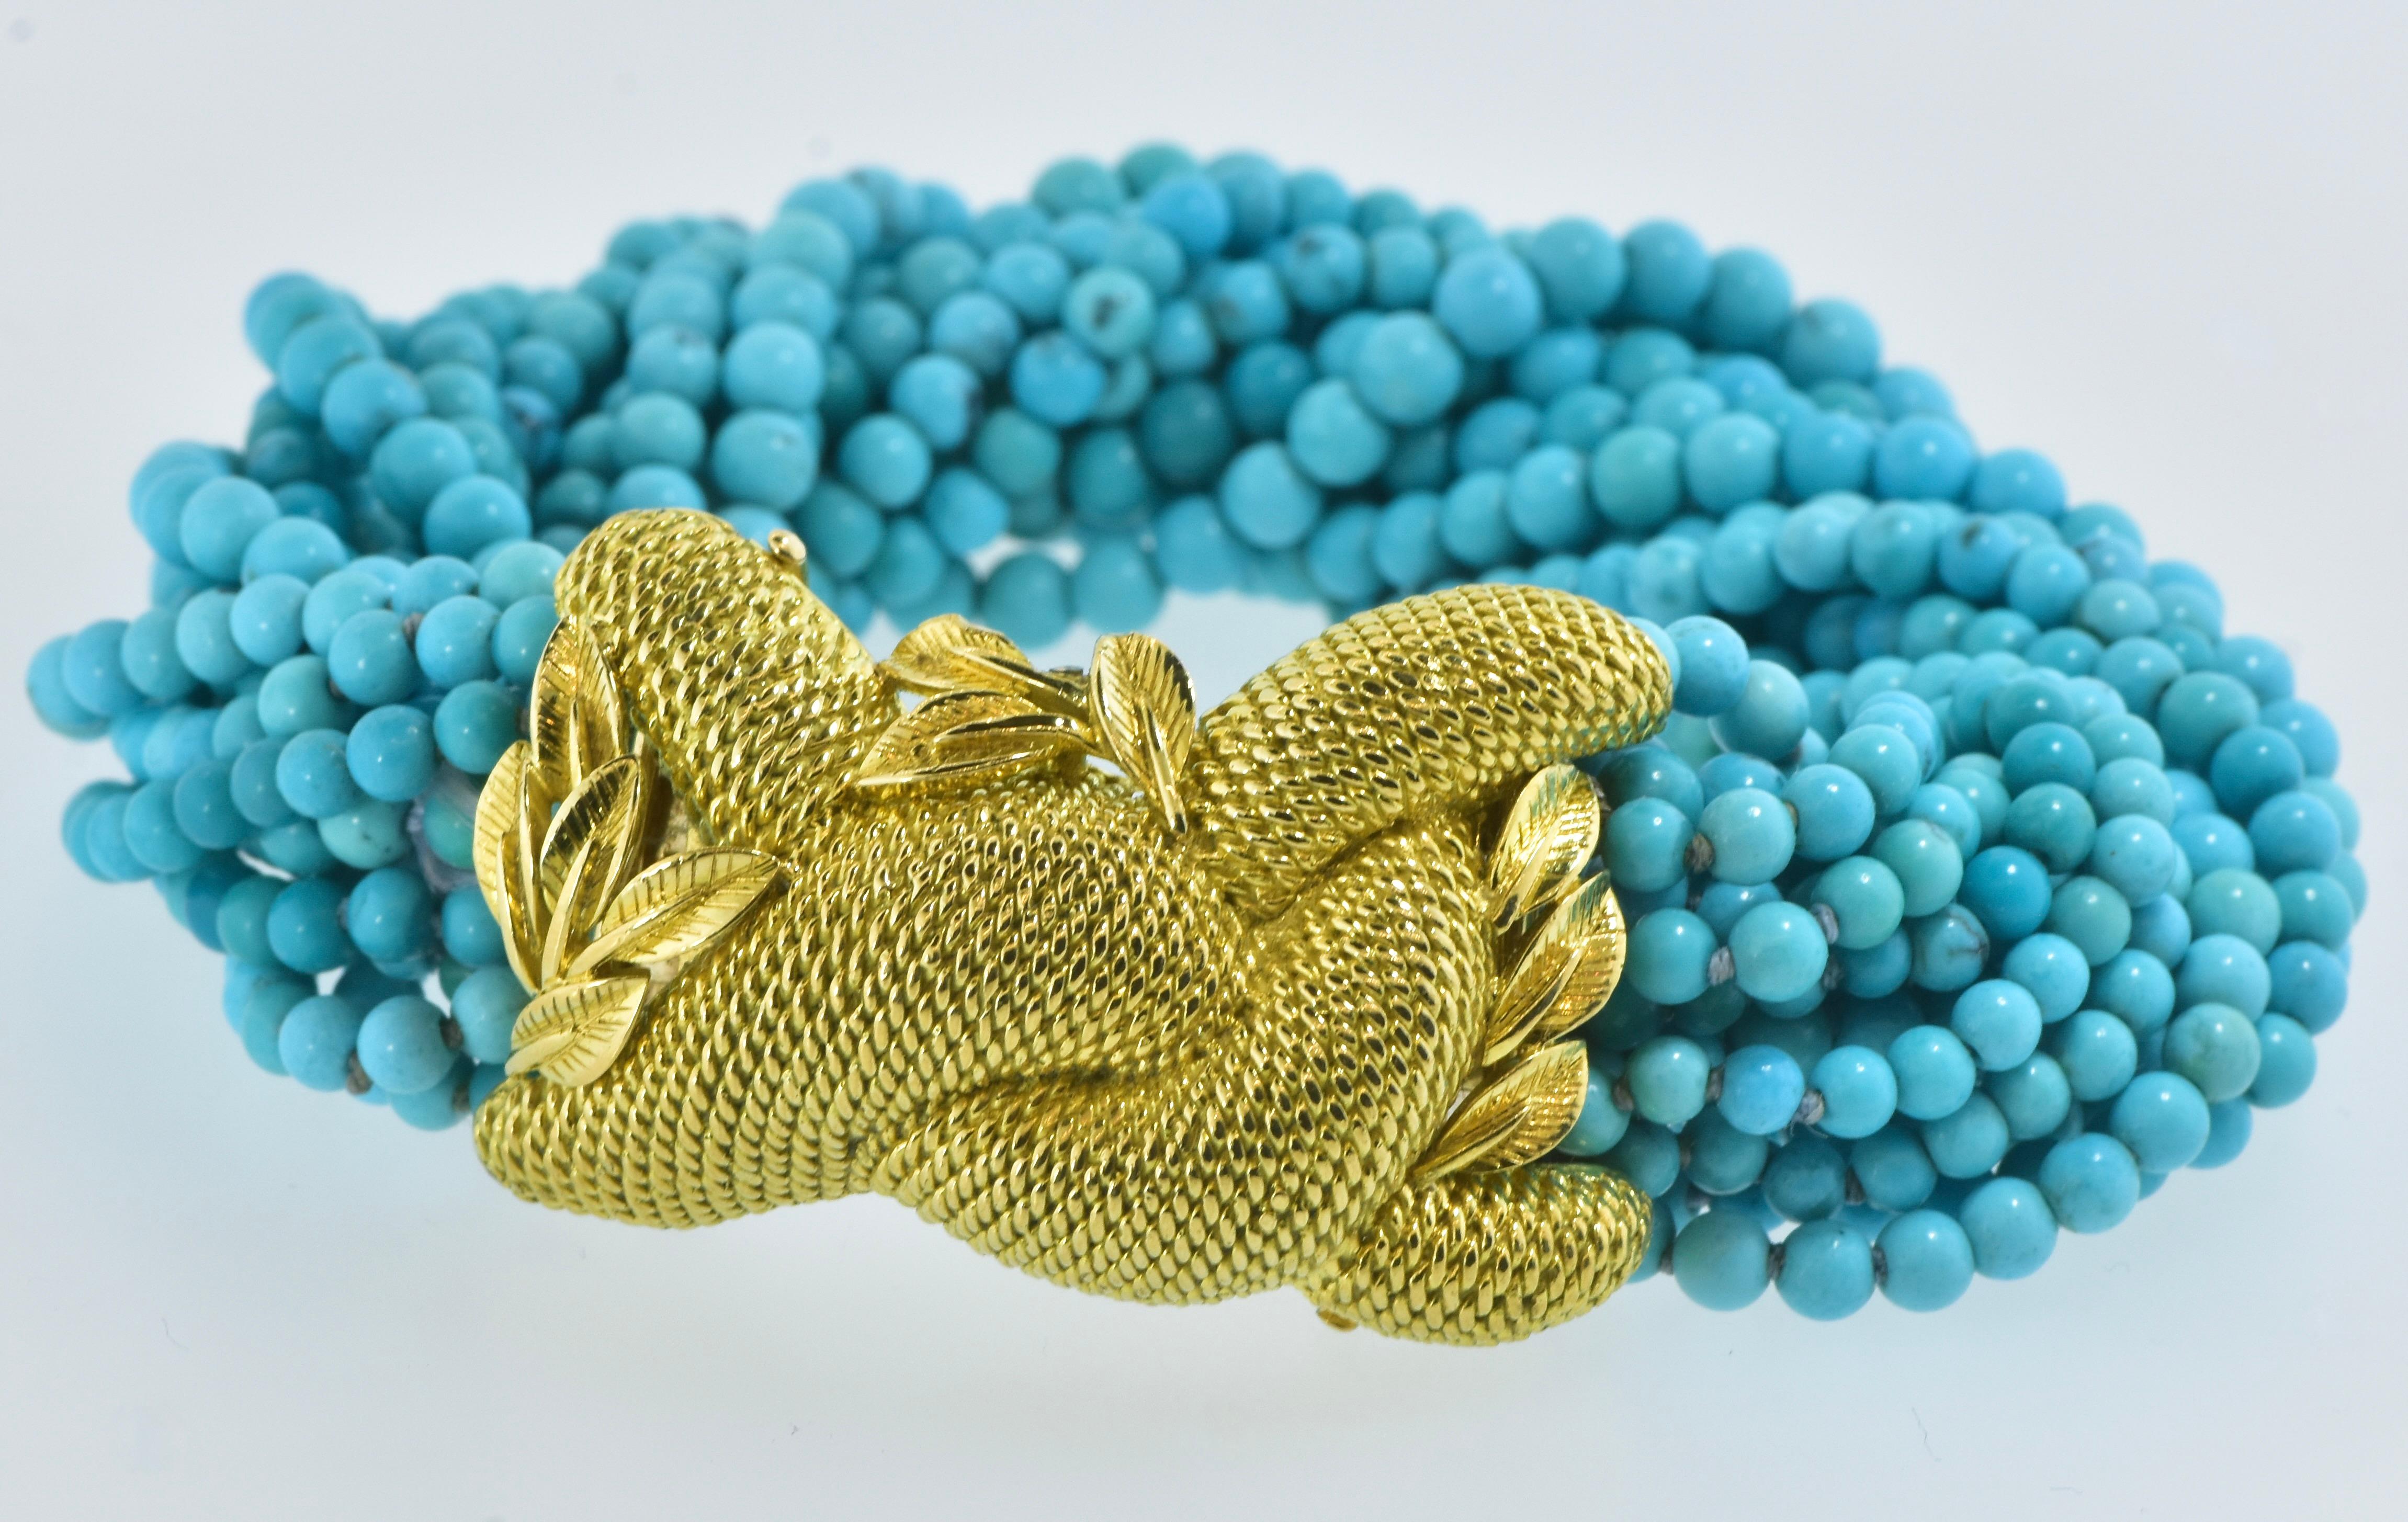 Fine Turquoise Bead Torsade Bracelet Centering an 18K High Relief Clasp, c. 1965 For Sale 2